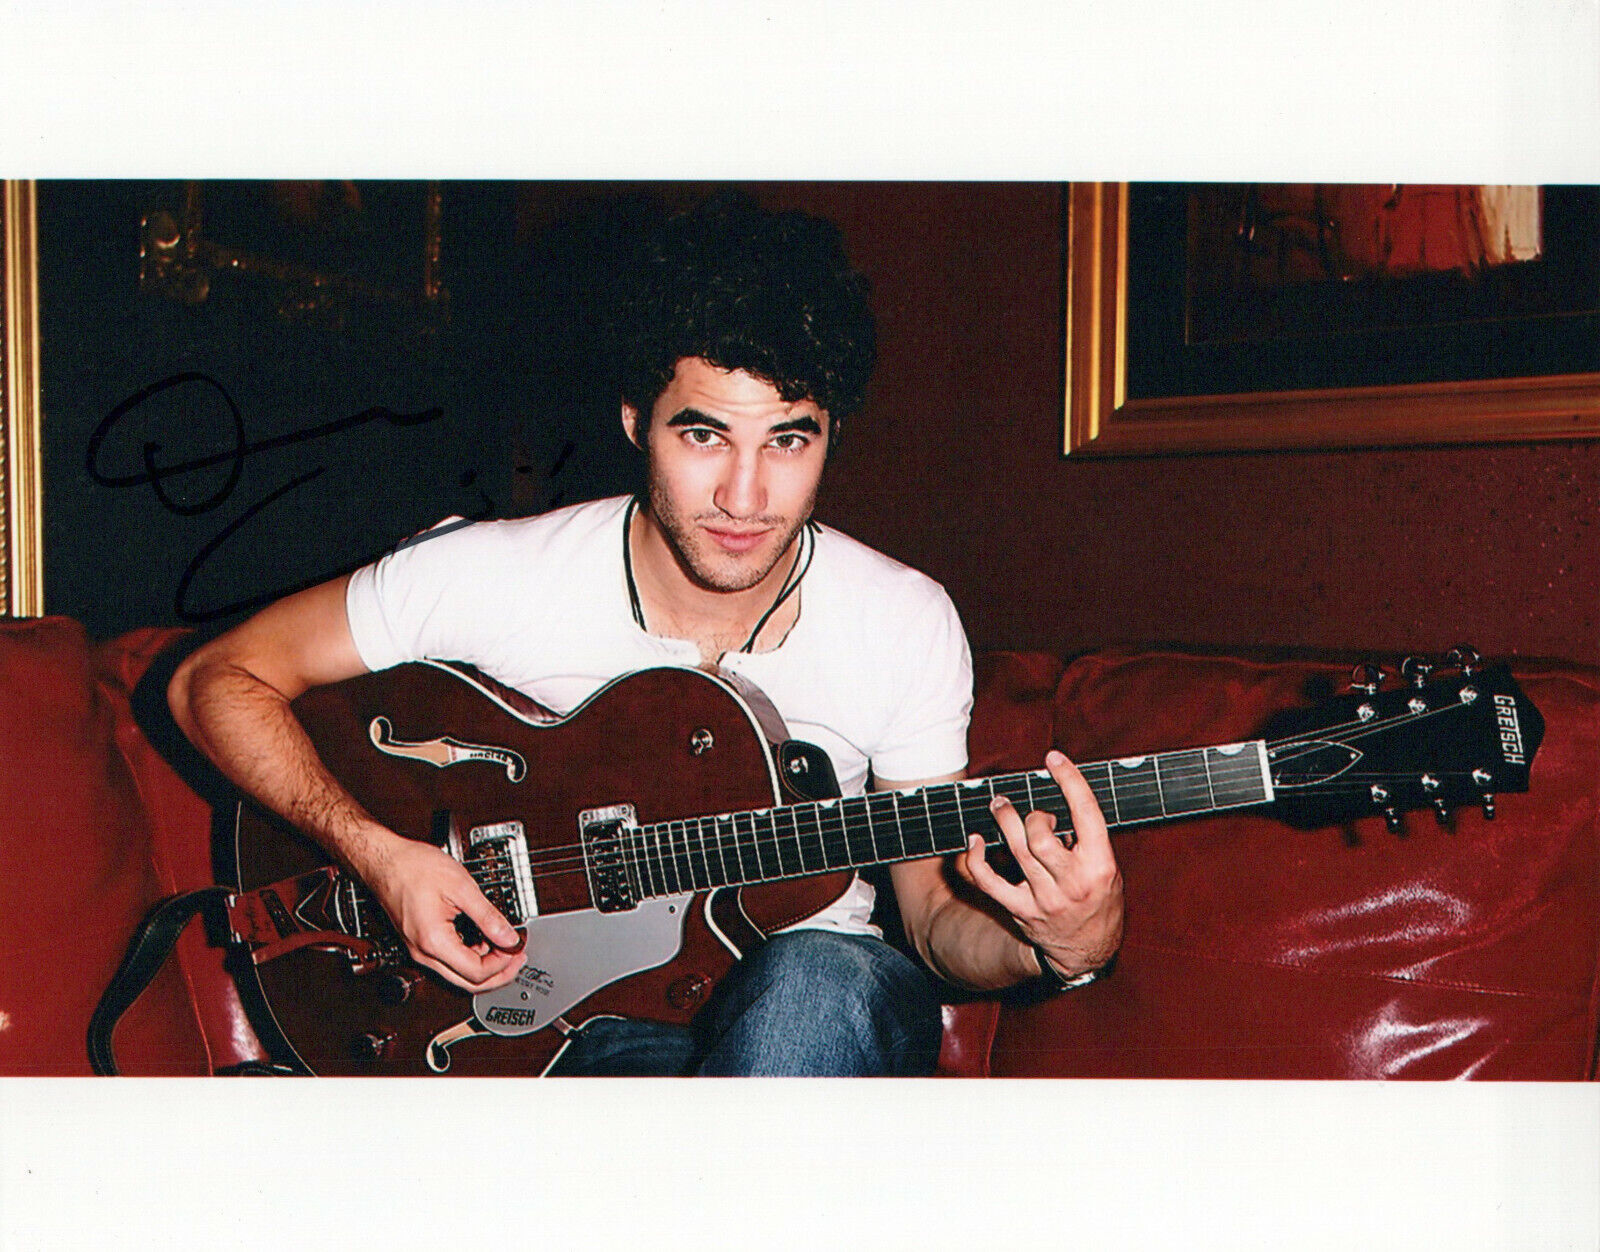 Darren Criss head shot autographed Photo Poster painting signed 8x10 #2